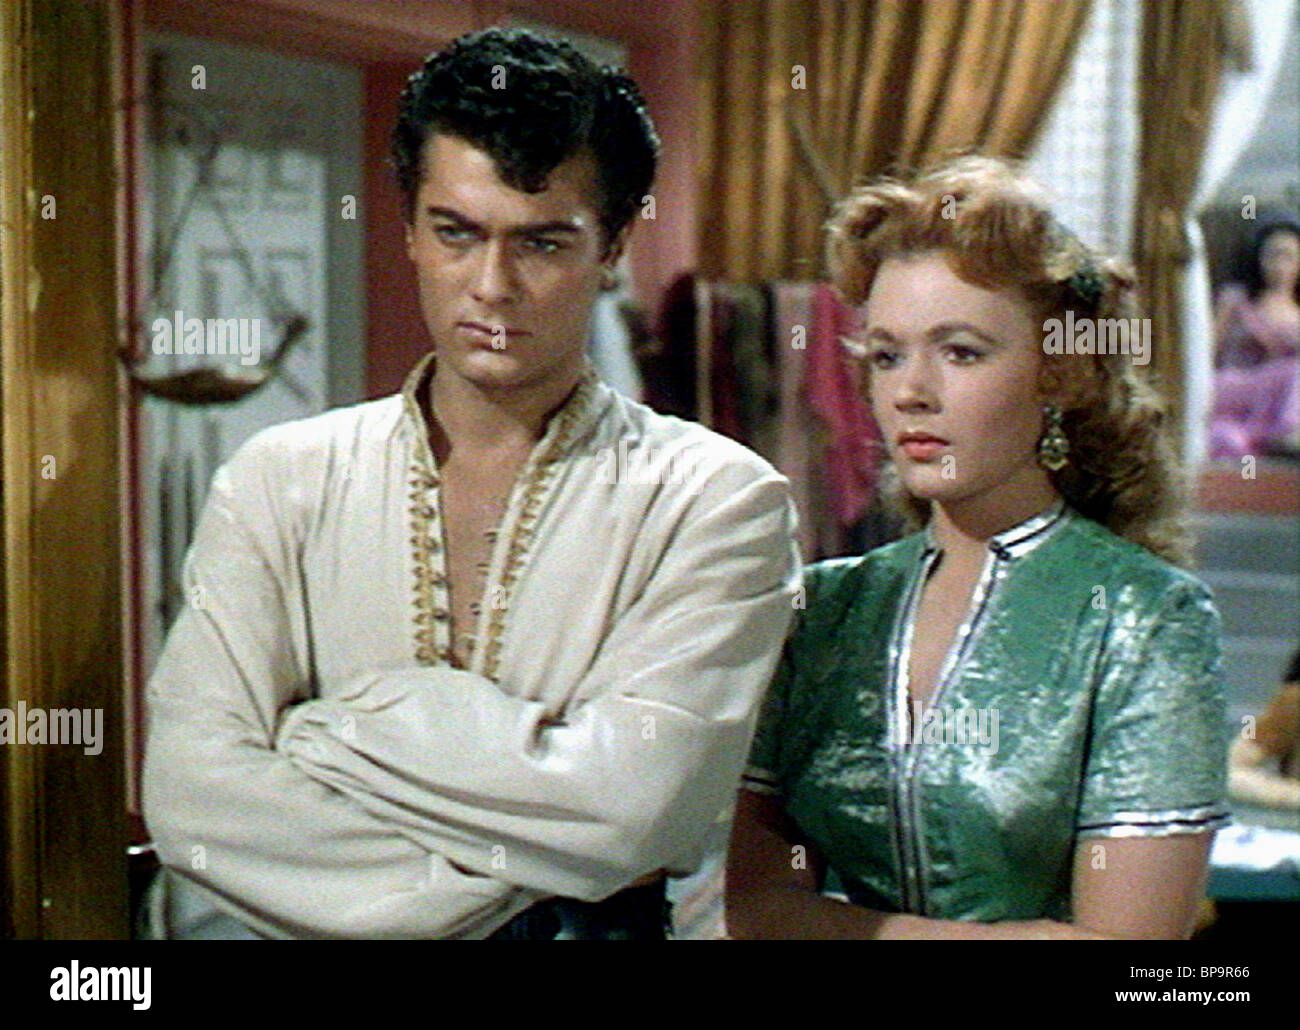 TONY CURTIS, PIPER LAURIE, FILS D'ALI BABA, 1952 Banque D'Images